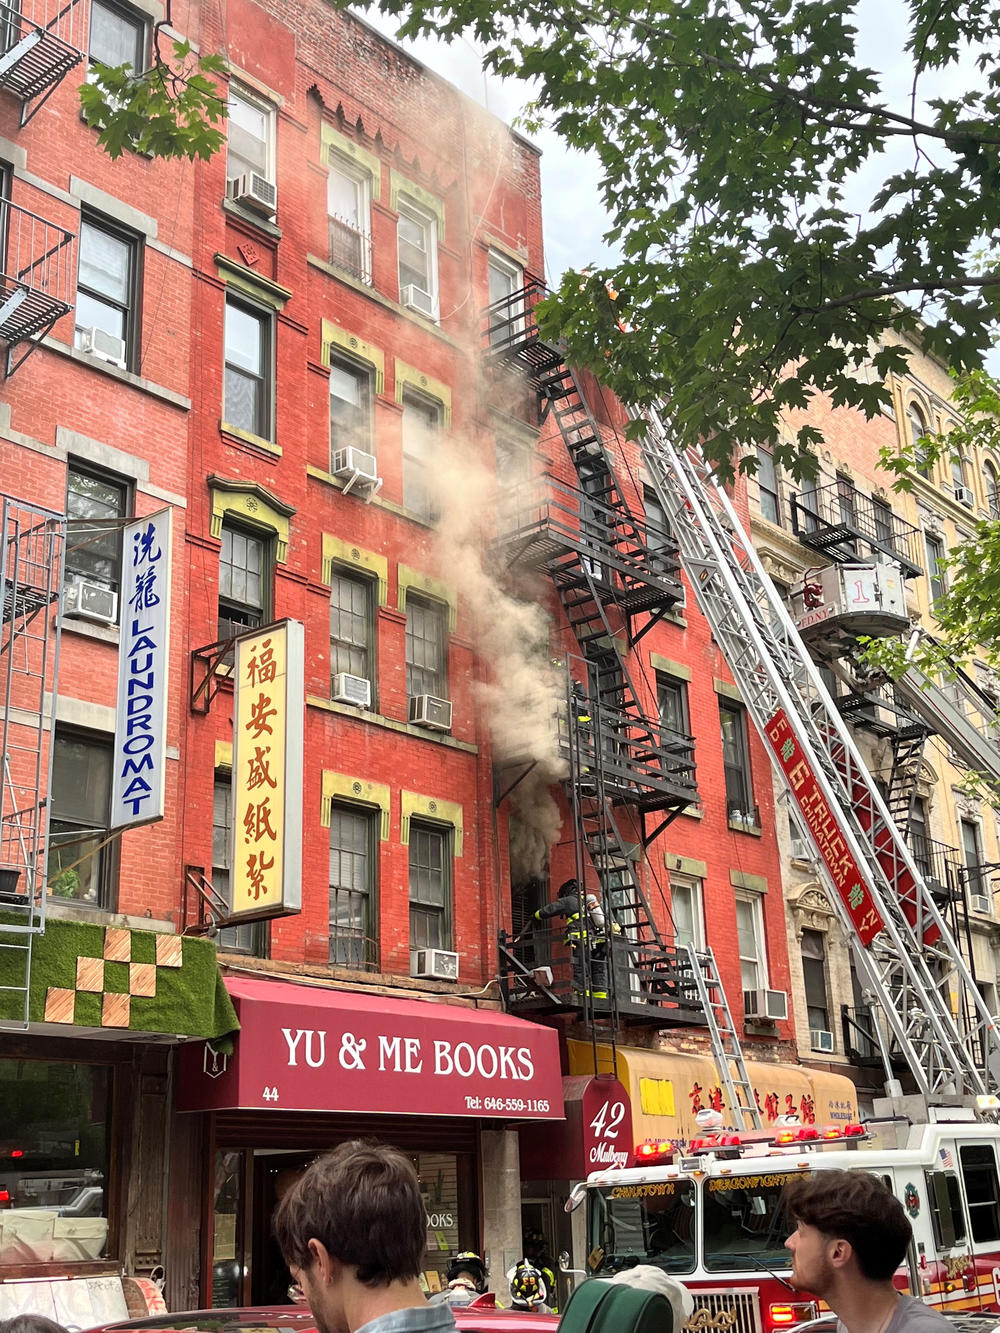 One person — a resident of the building — was killed in the July 4 fire that damaged Yu & Me Books.